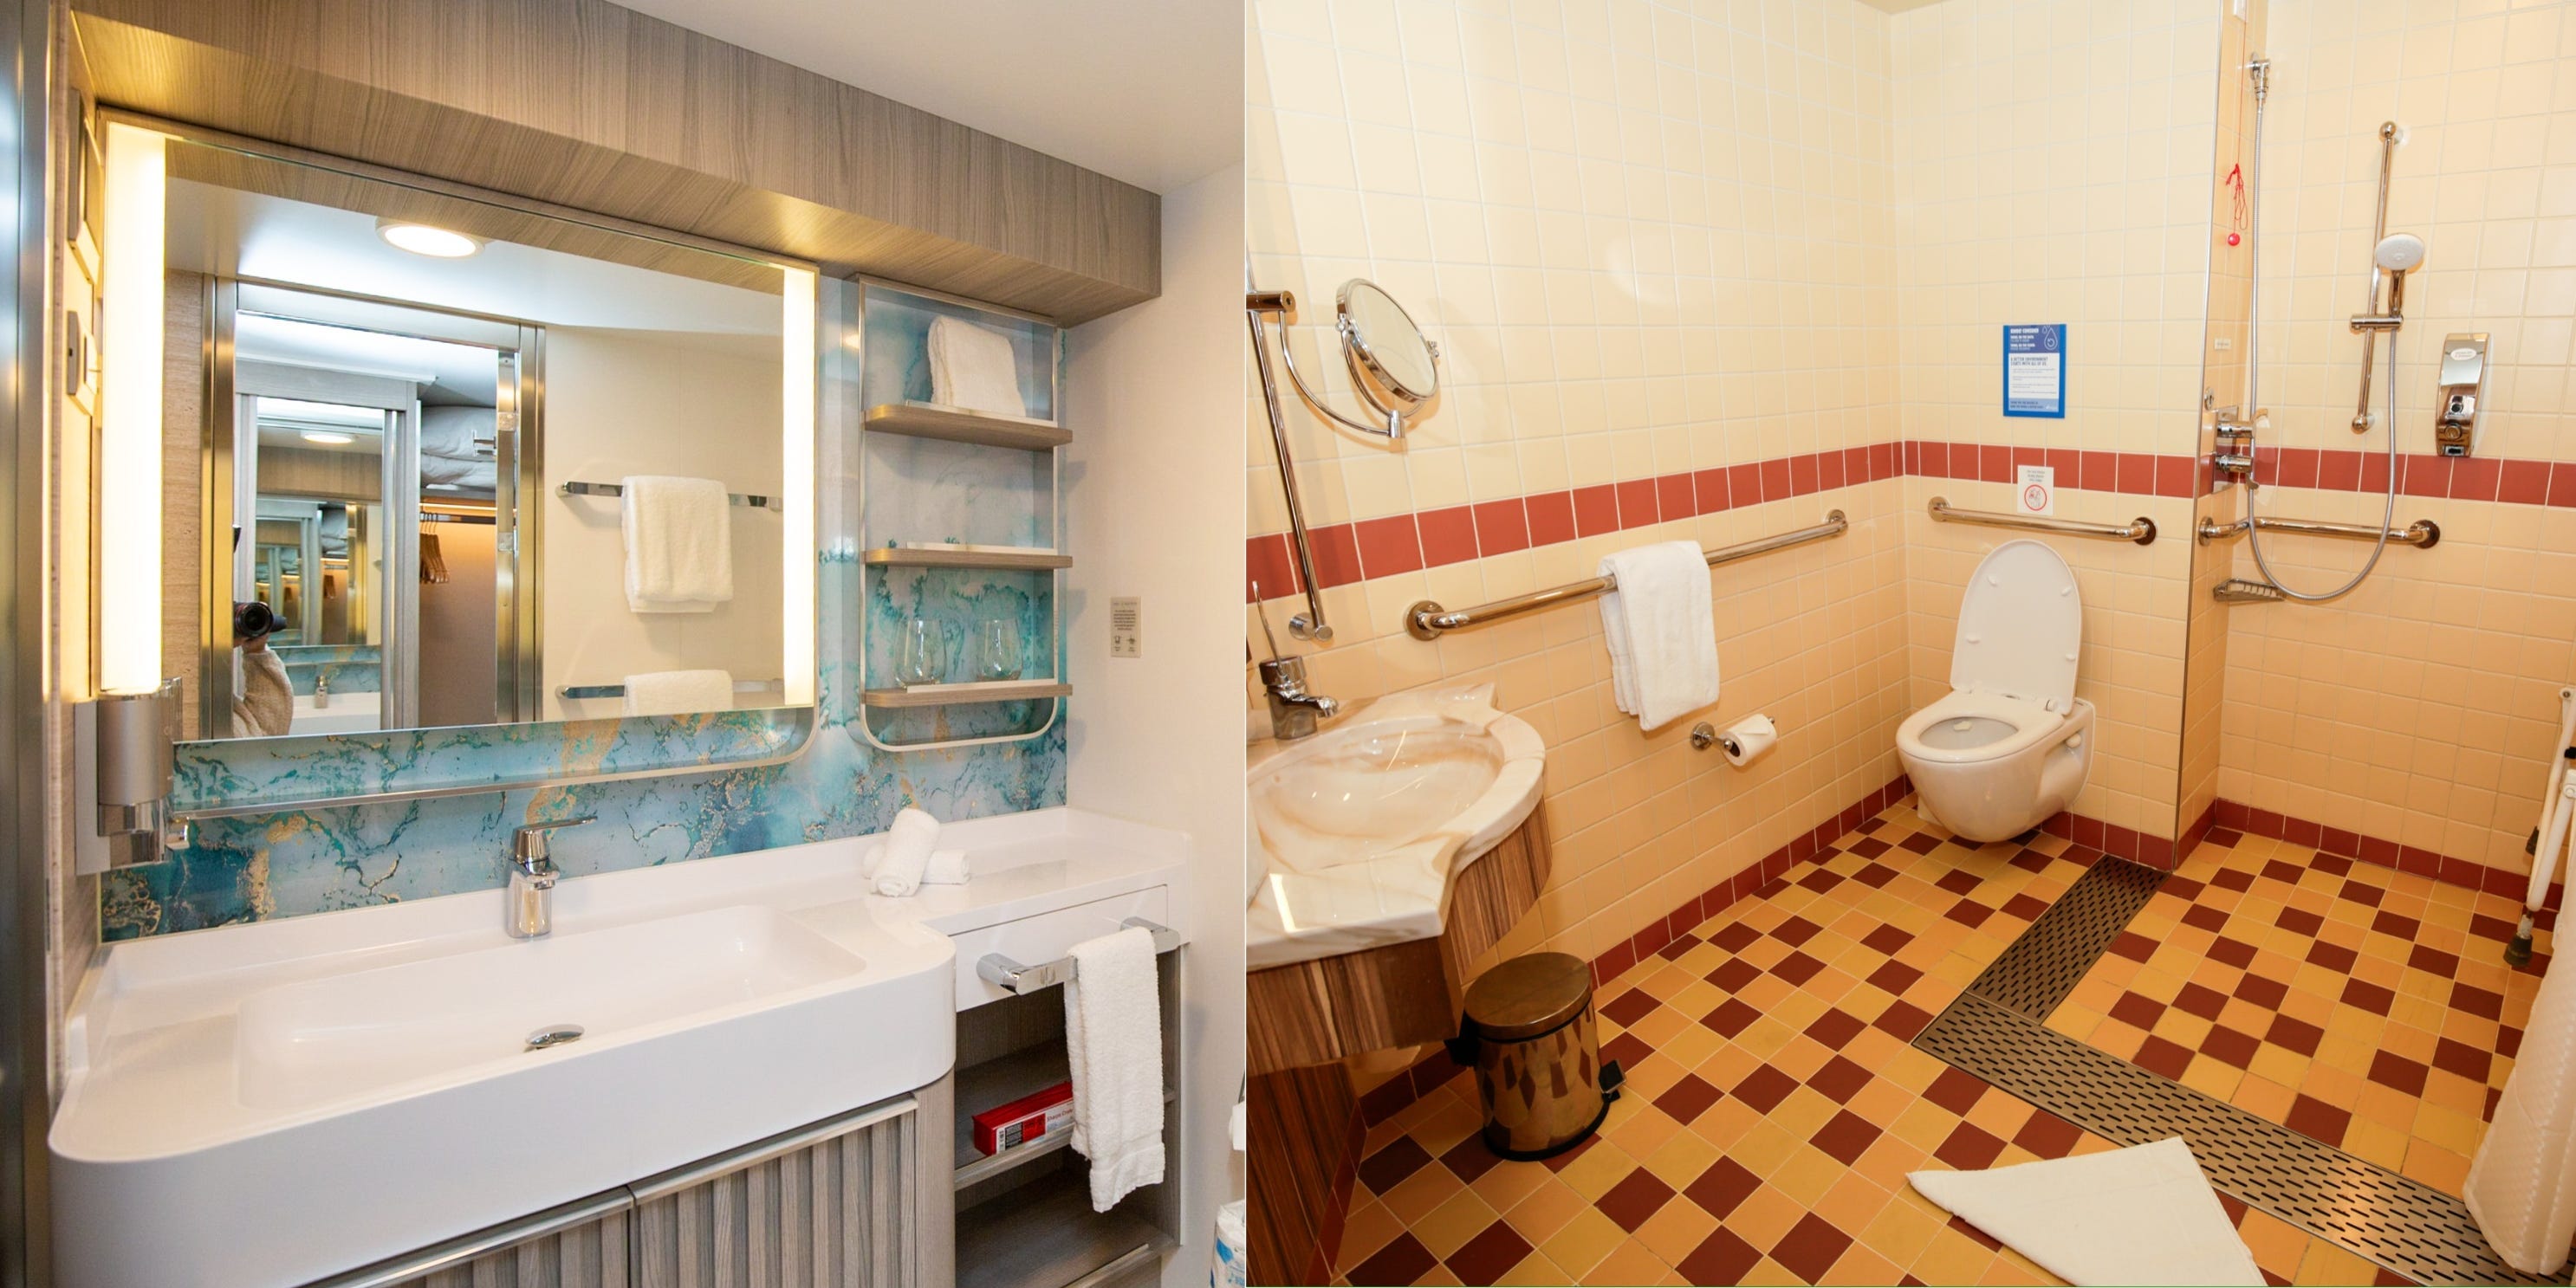 <p>It was about as glamorous as a gas station restroom.</p><p>Most of my <a href="https://www.businessinsider.com/photos-luxurious-1000-per-person-stateroom-inside-new-norwegian-prima-2022-10">cruise cabin bathrooms</a> have had modern, cool-toned decor, like the one pictured on the left. Carnival seems to have avoided the industry trend as much as possible.</p>